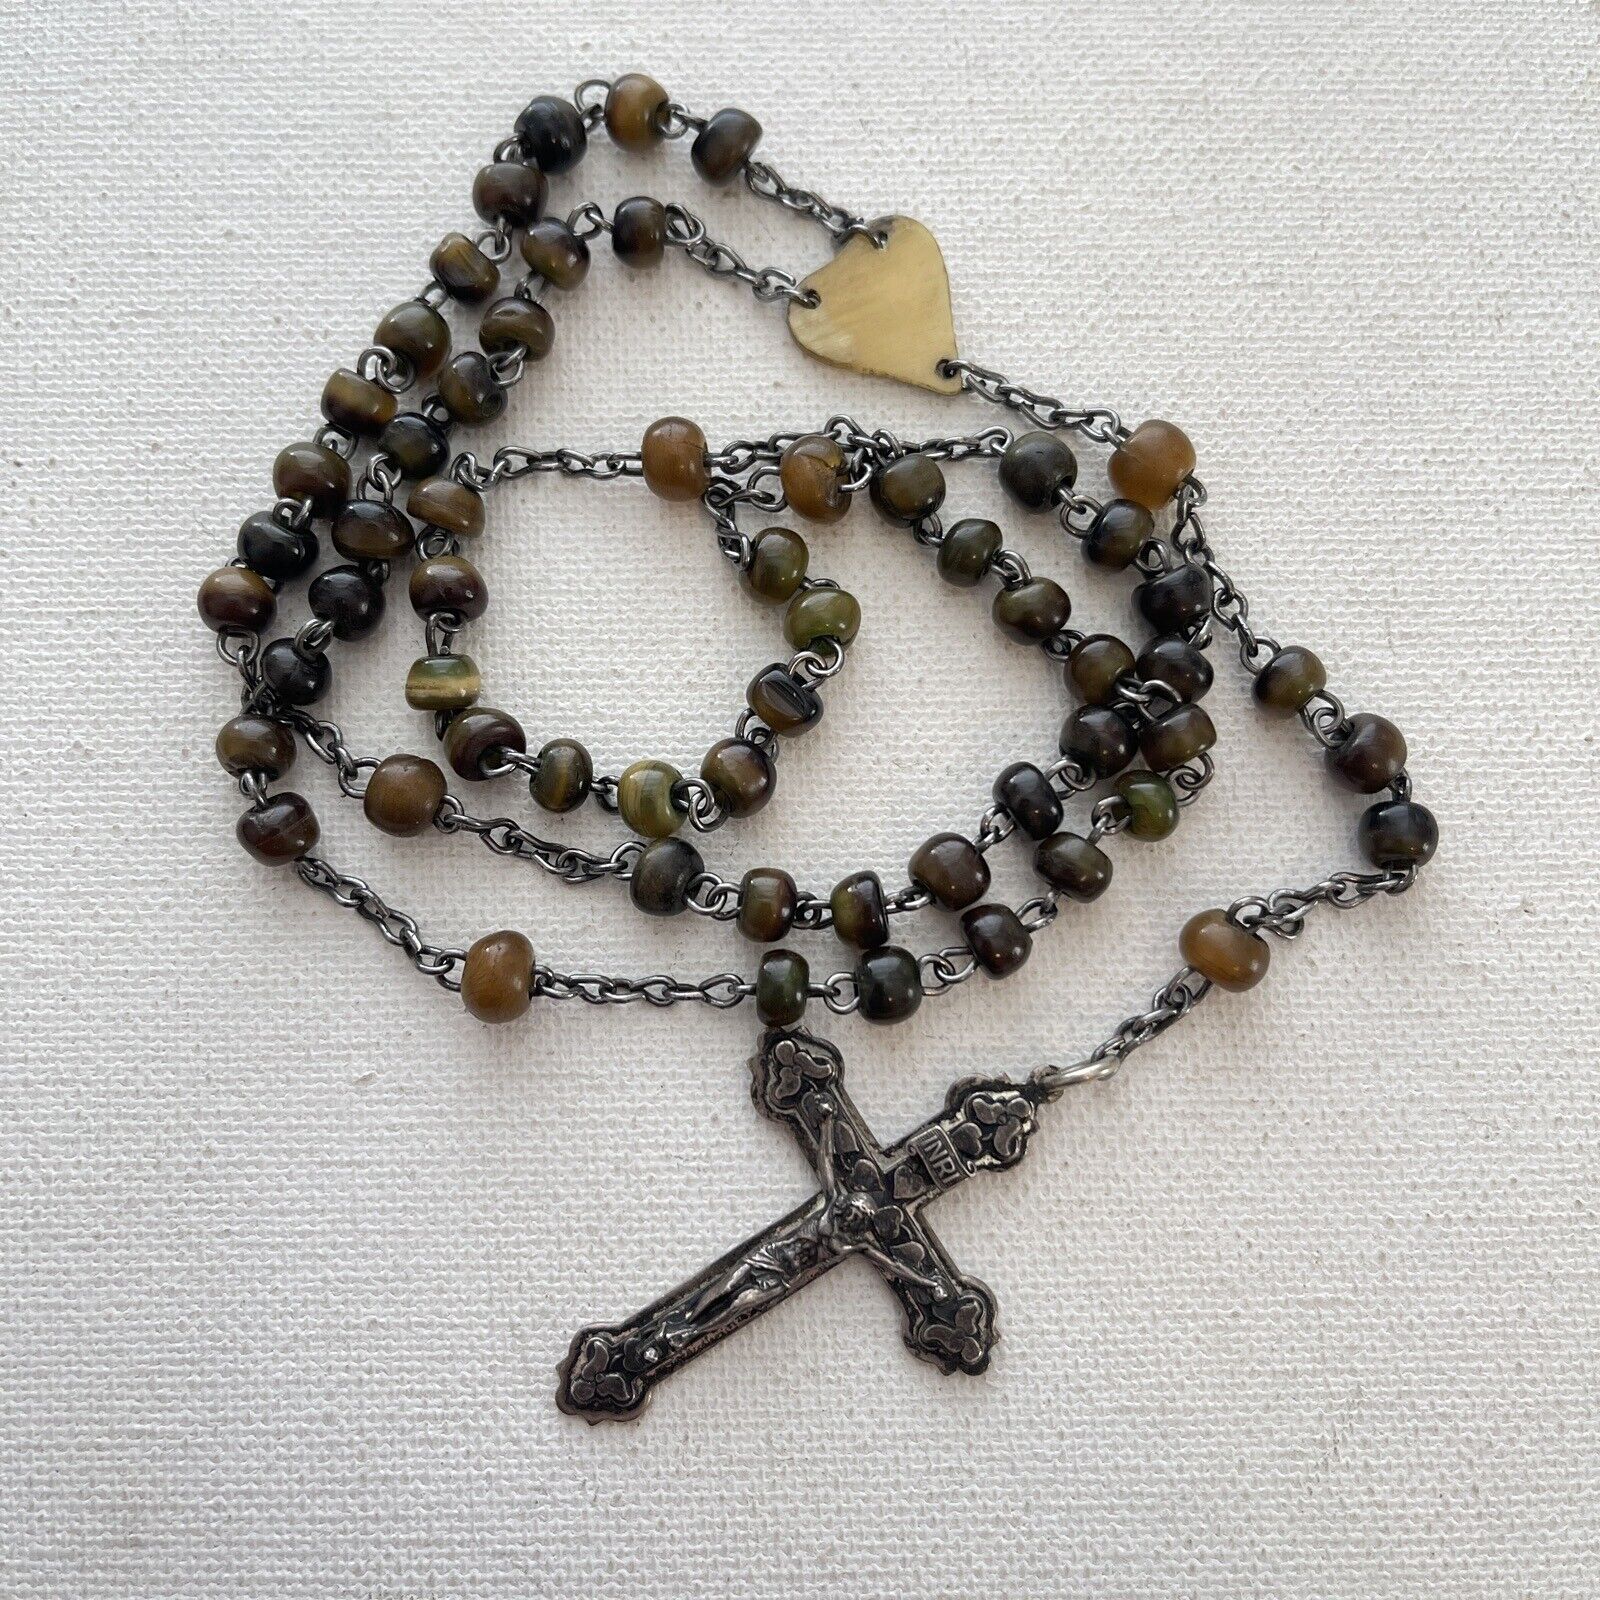 Vintage Irish Cattle Horn Dyed Green Bead Chain Sterling Rosary Crucifix